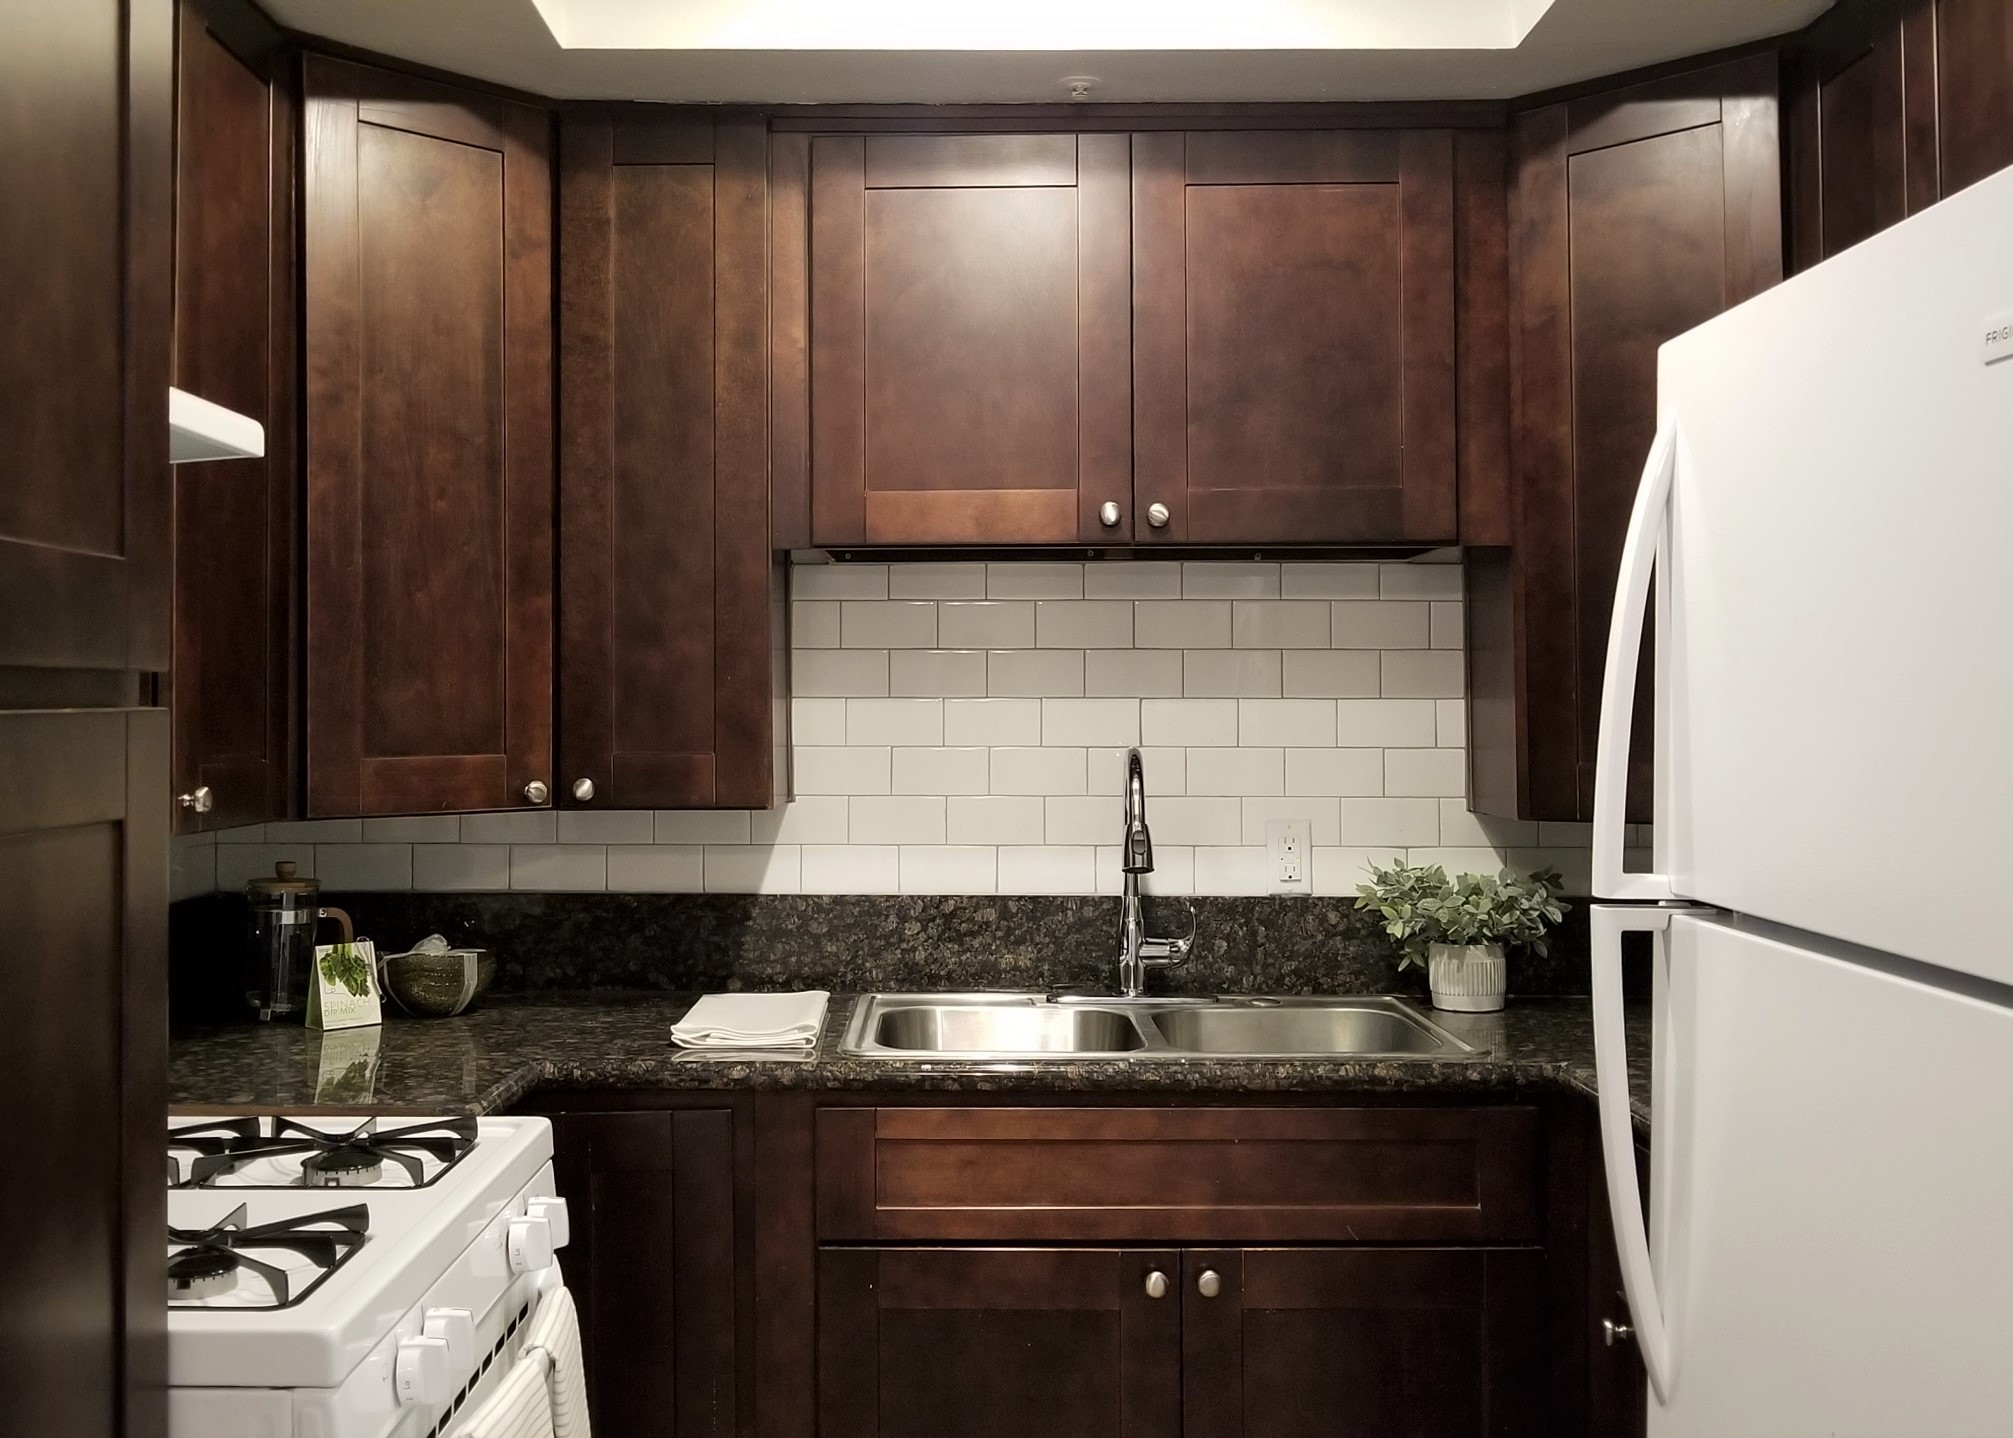 Kitchen cabinetry, stove, granite counter top, and refrigerator